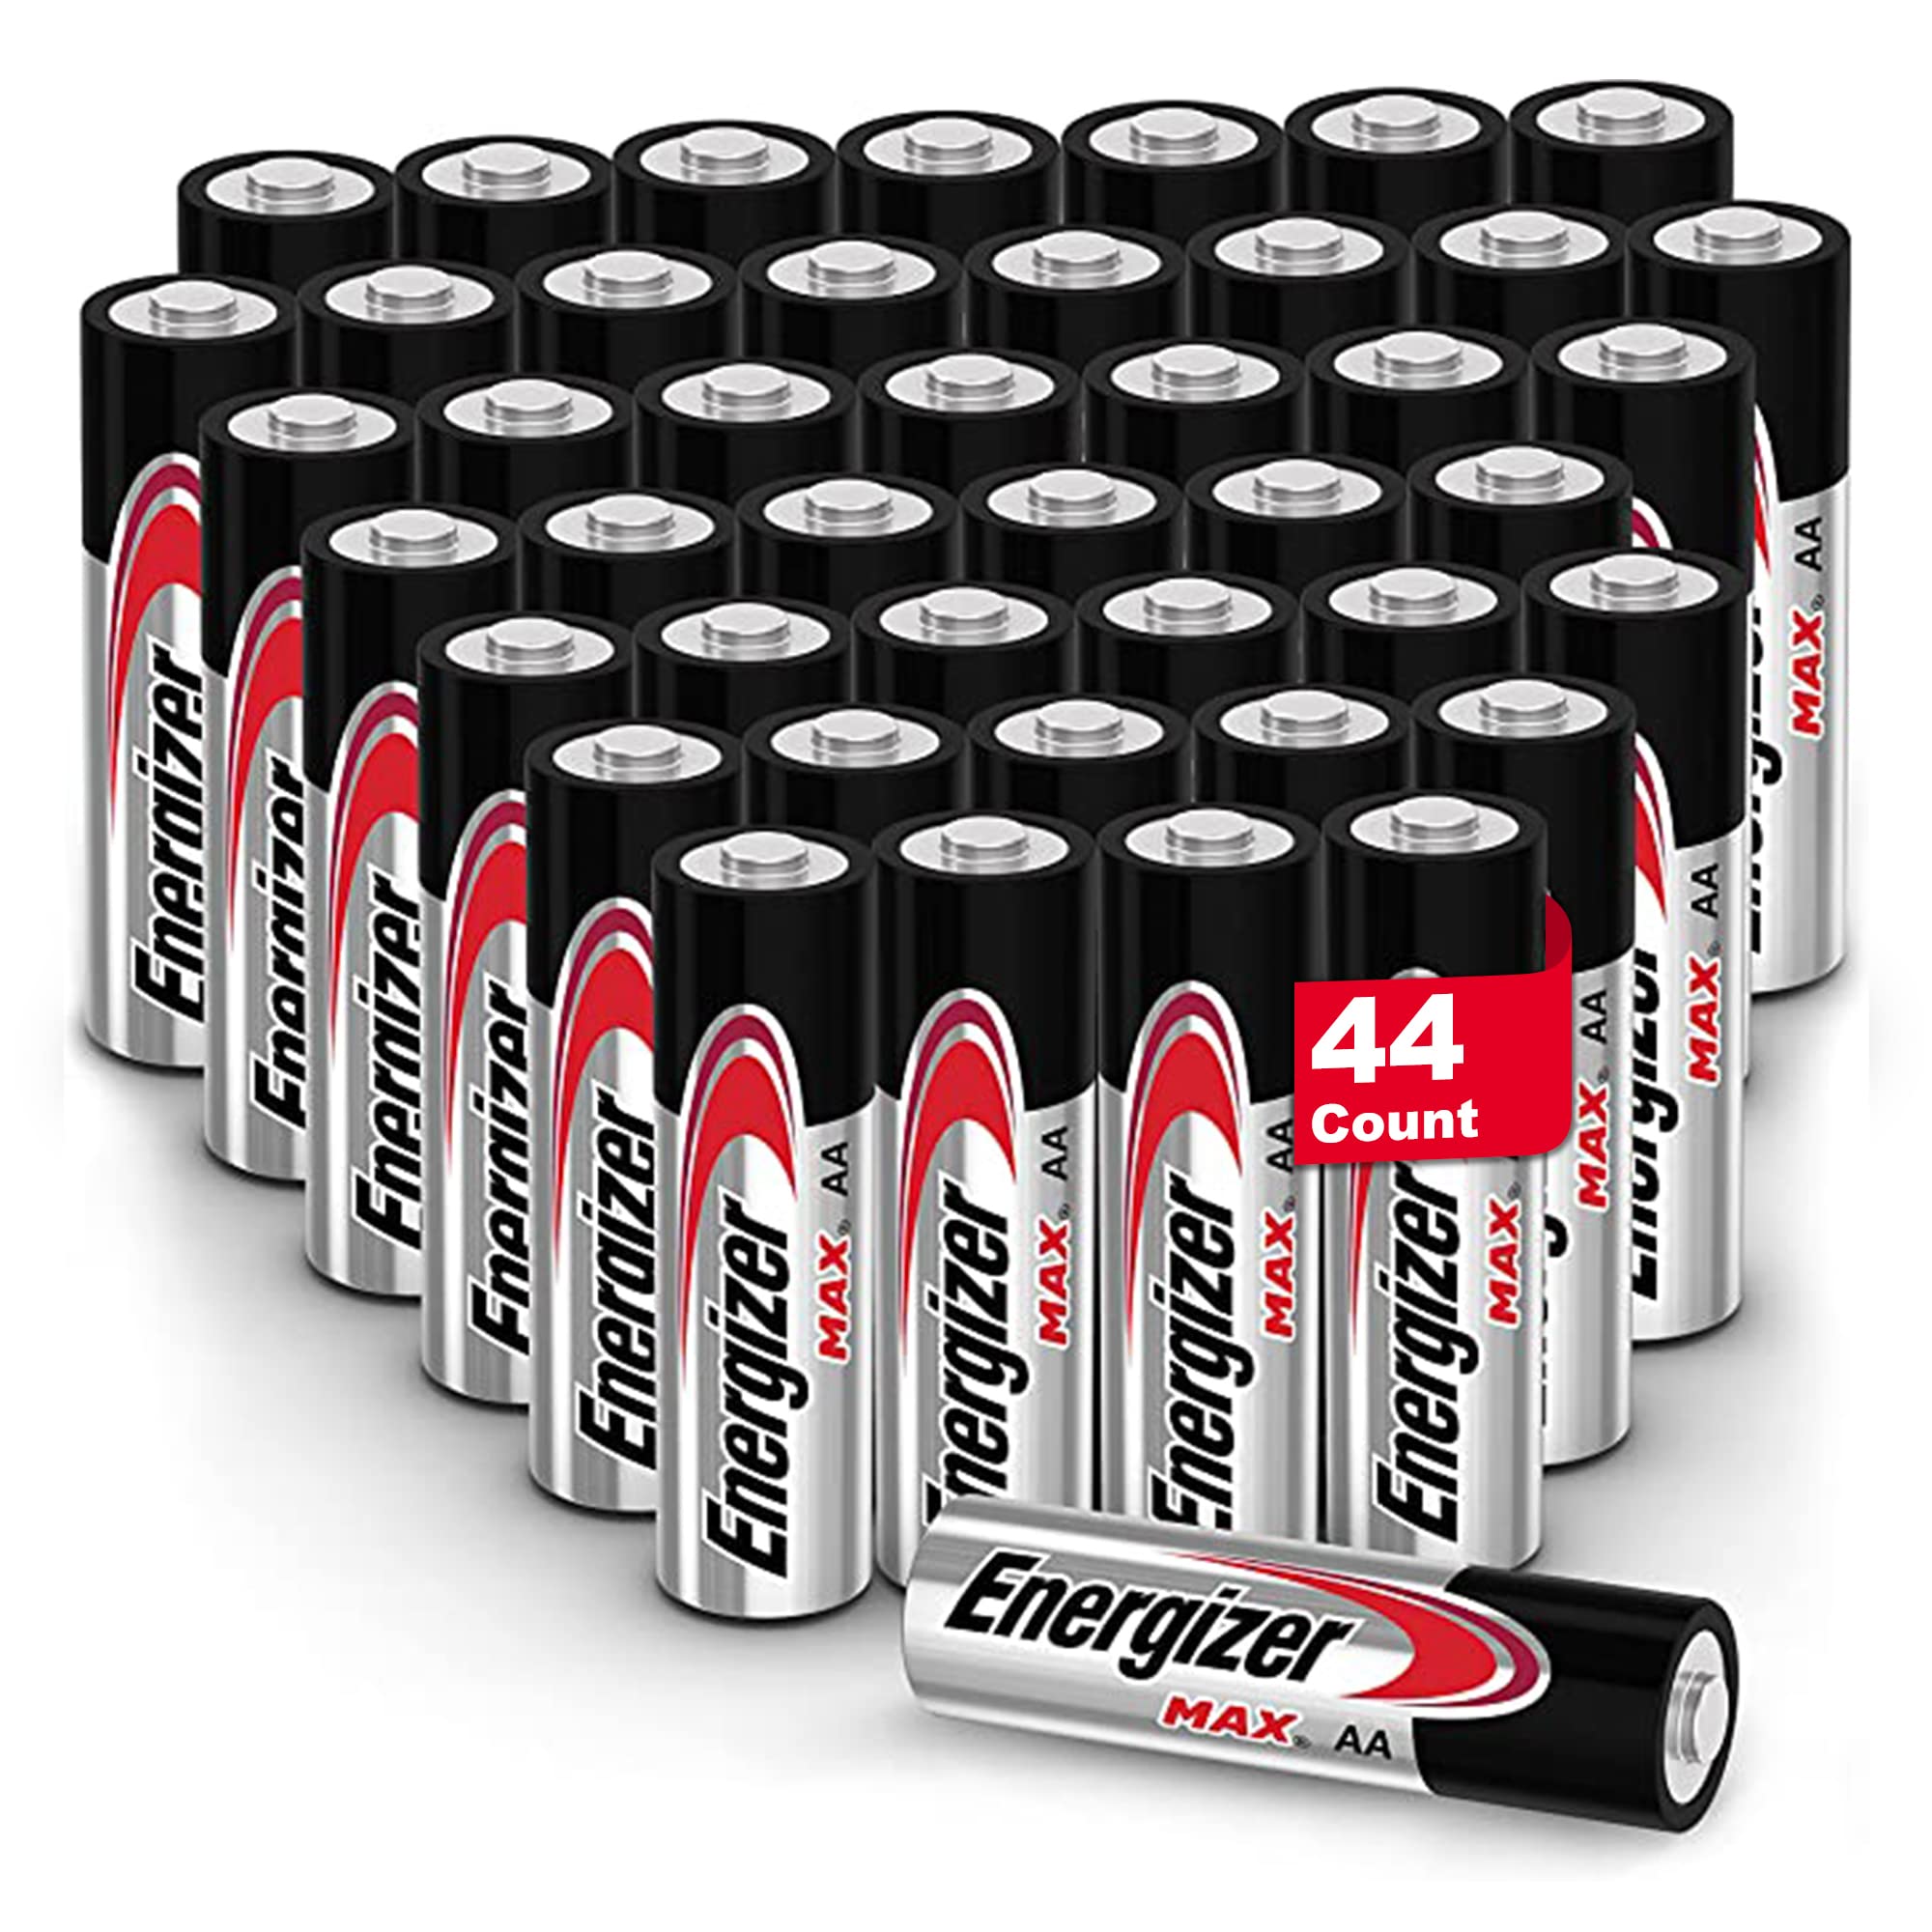 Energizer Max AA Batteries Value Pack, 44 Count of Alkaline AA Battery